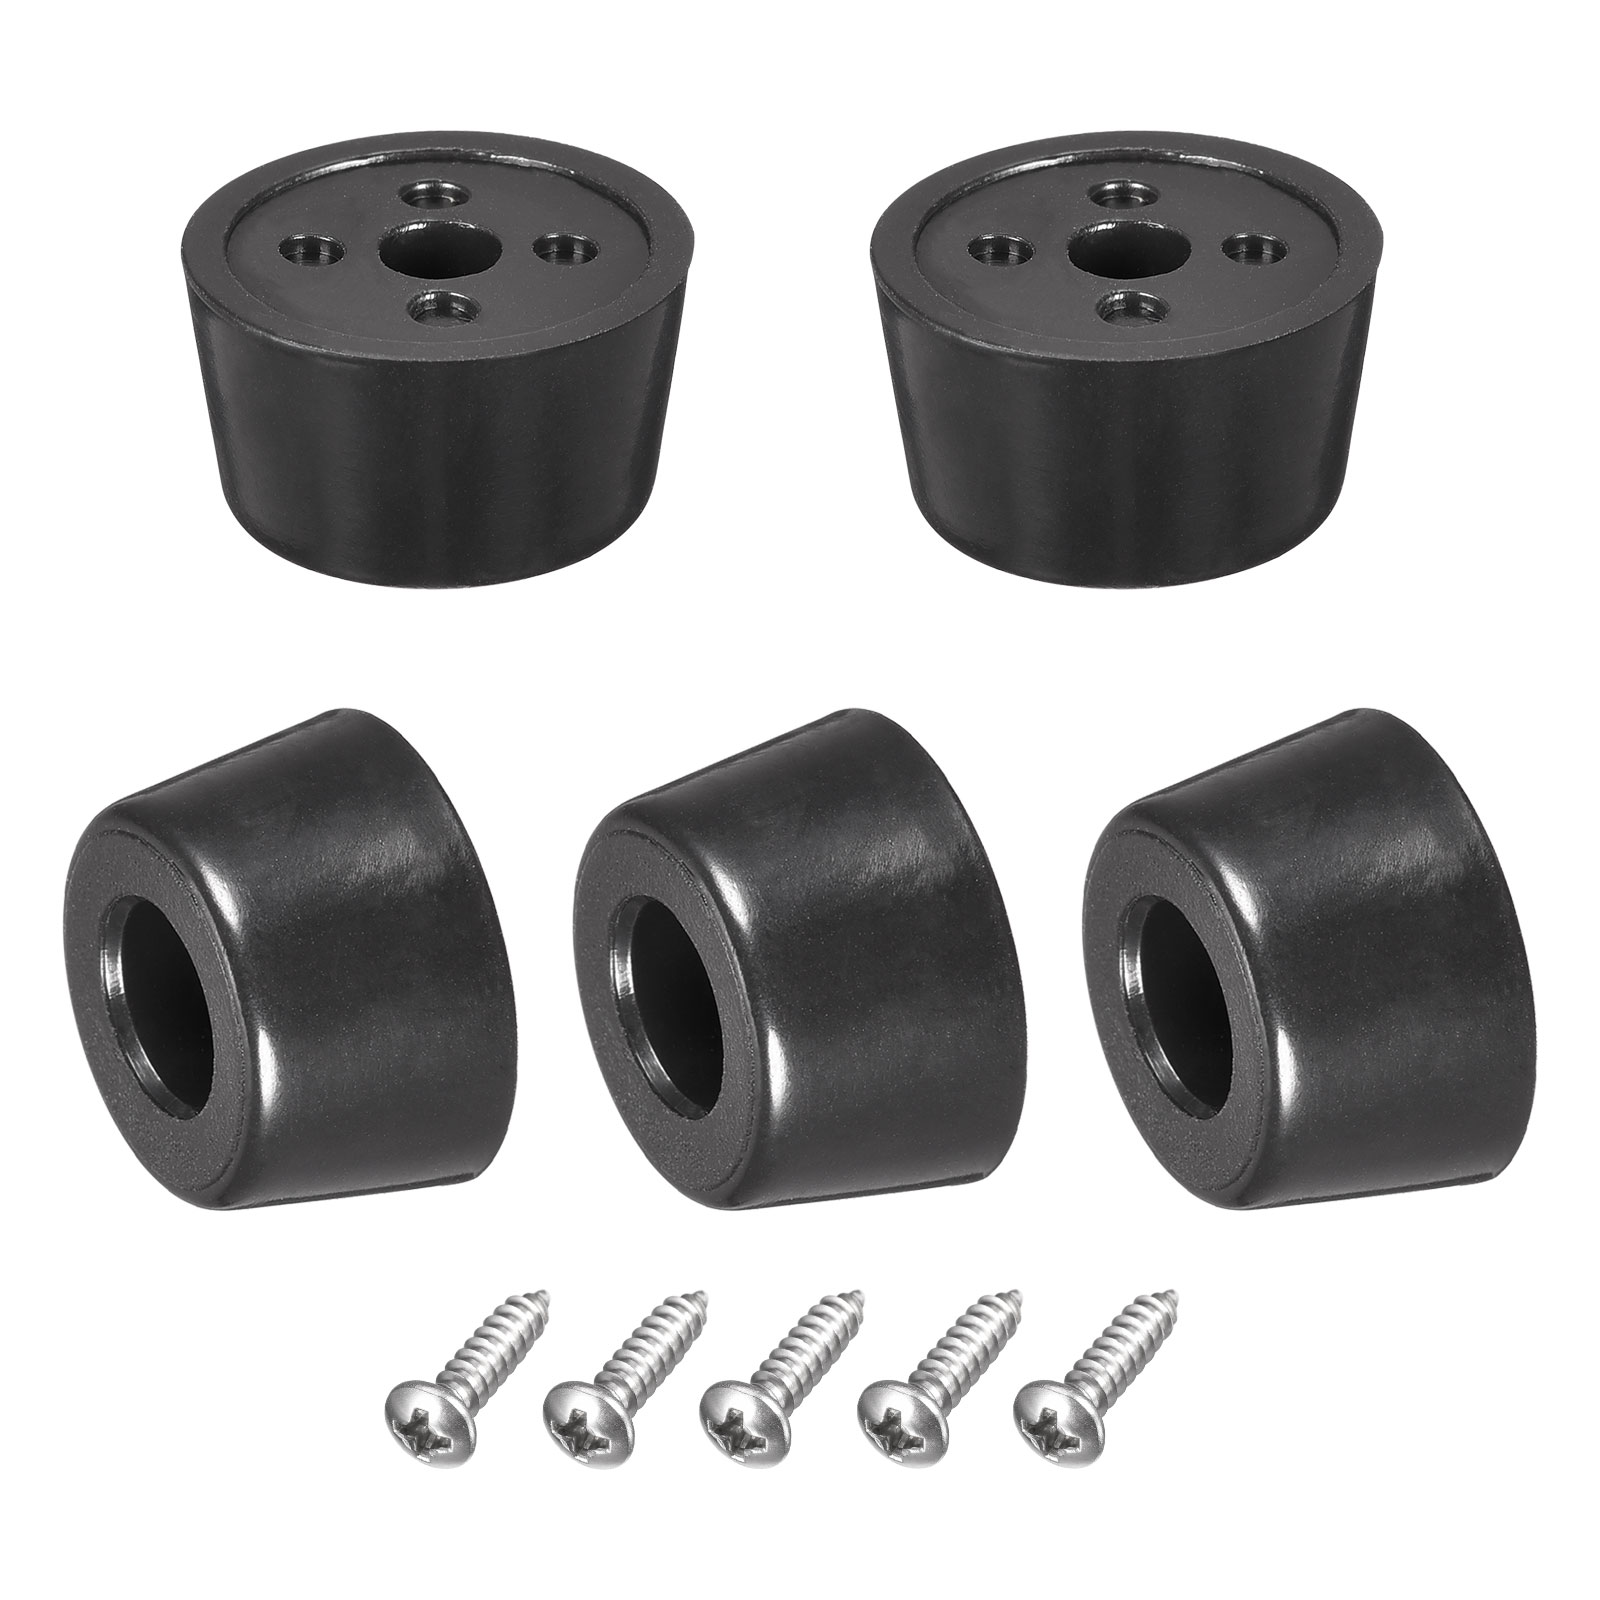 Uxcell 20mm W x 10mm H Rubber Bumper Feet, Stainless Steel Screws and Washer Black 20 Pack - image 1 of 5